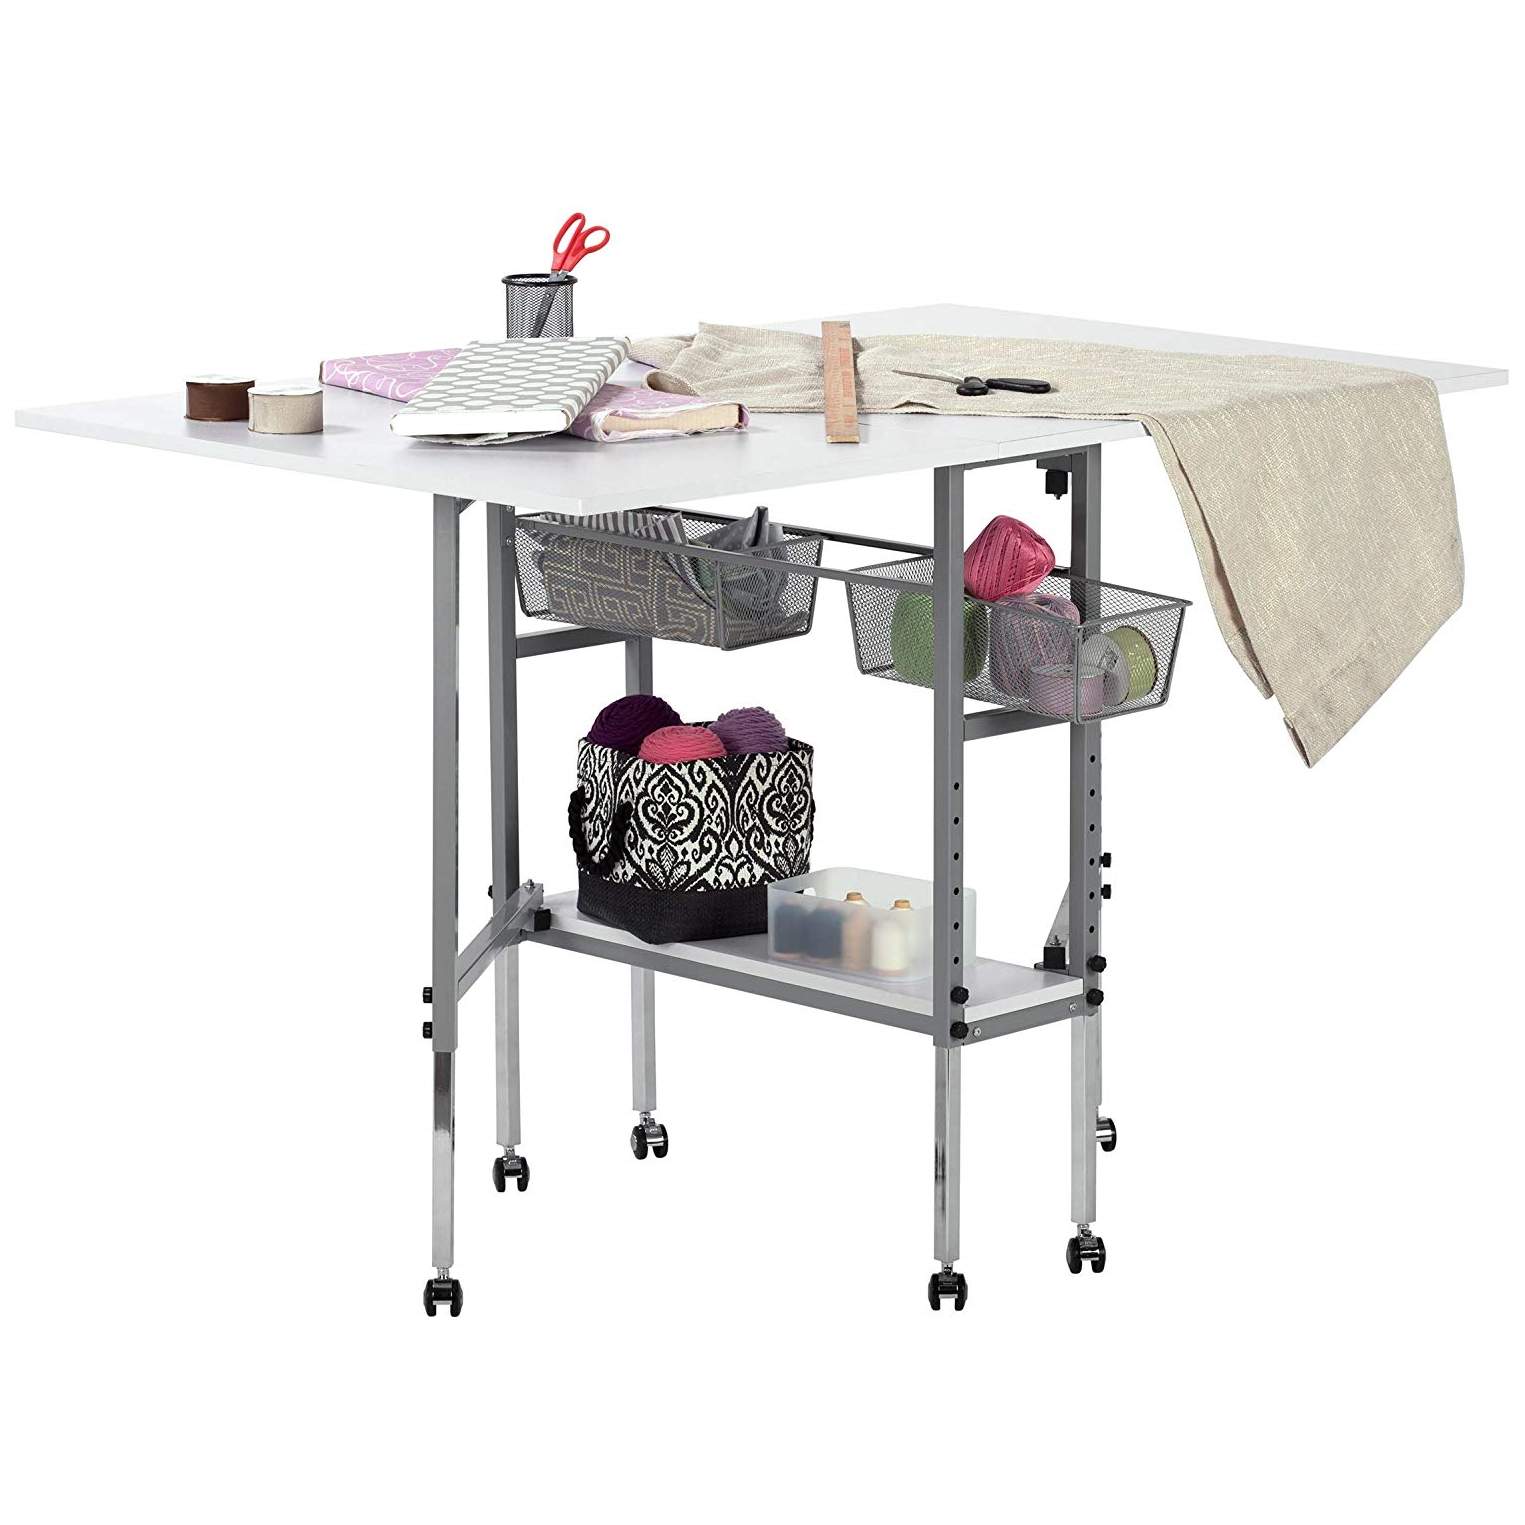 Sew Ready Studio Designs 13374 Folding Cutting Table with Drawers